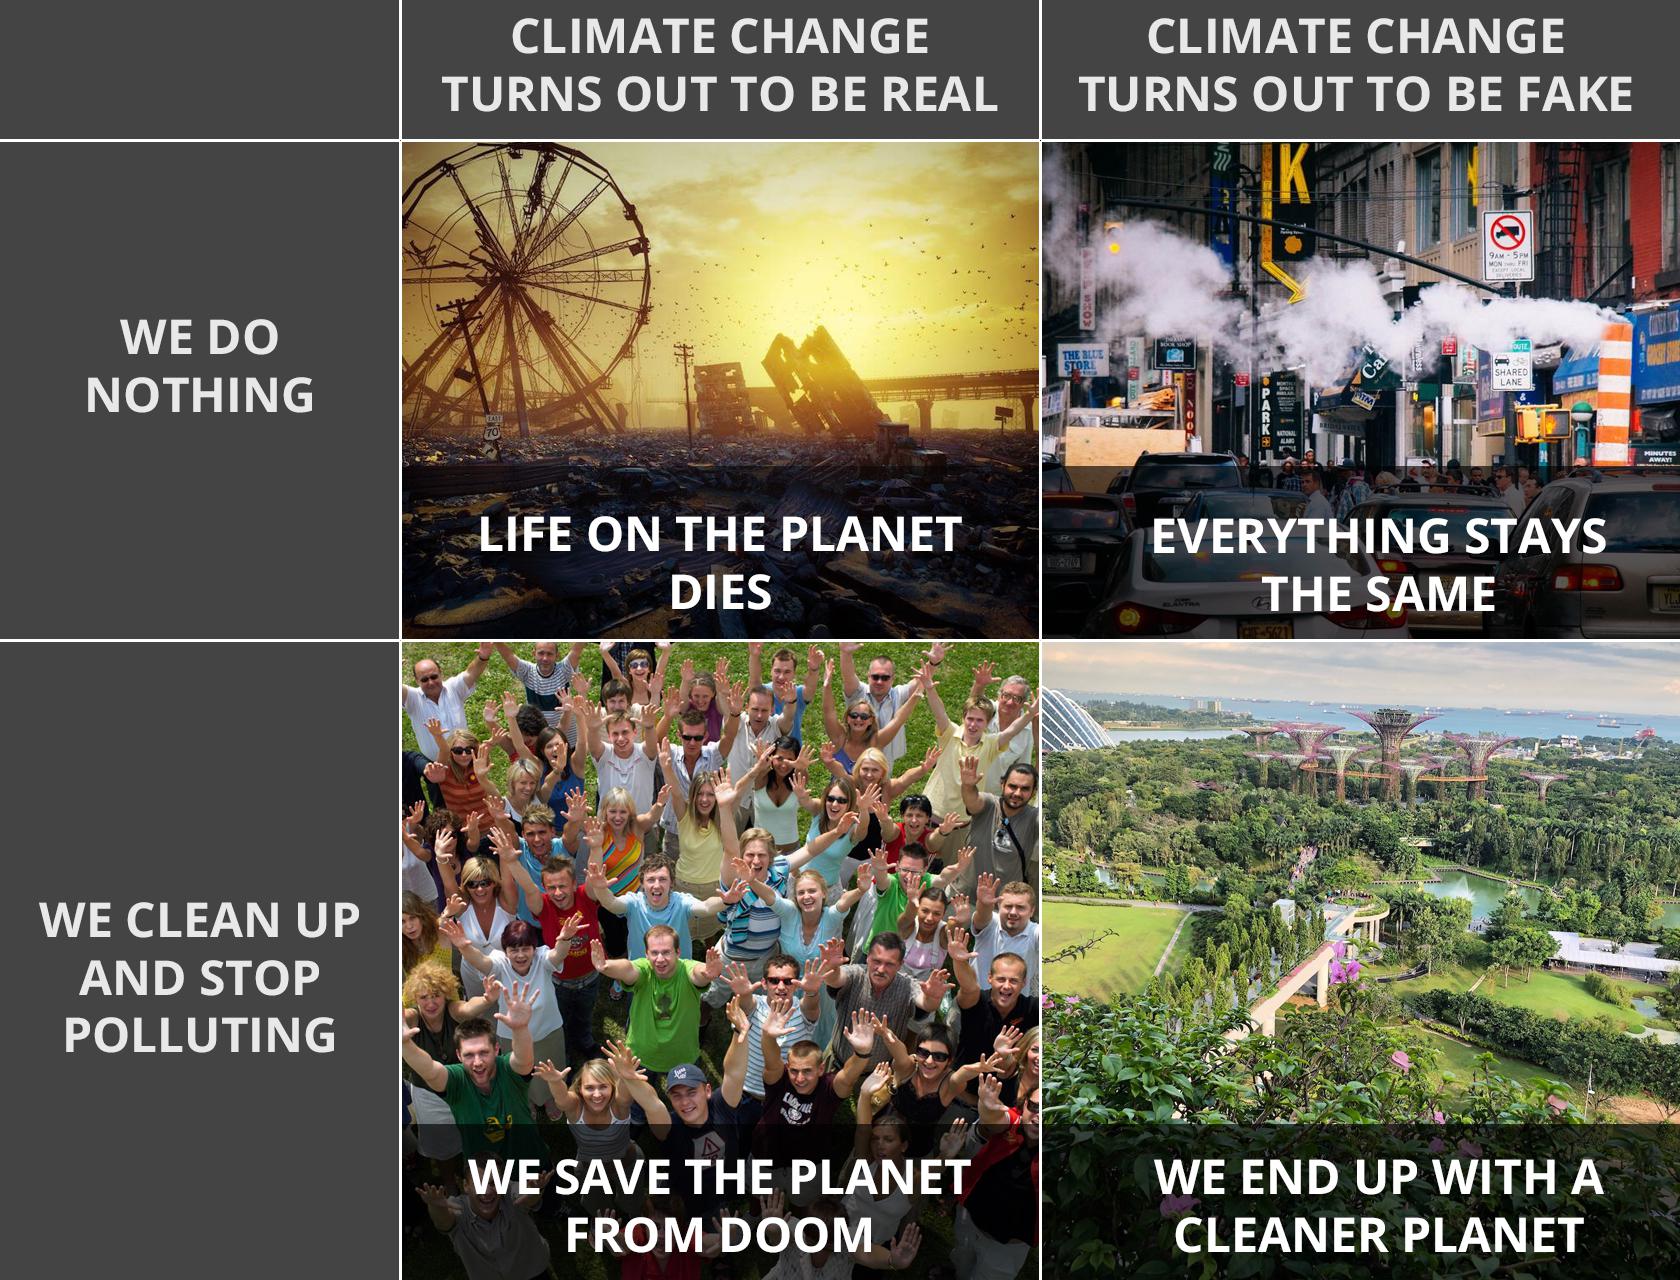 political political-memes political text: WE DO NOTHING WE CLEAN UP AND STOP POLLUTING CLIMATE CHANGE TURNS OUT TO BE REAL ON THE PLANET DIES WE SAVE THE PLANET FROM DOOM CLIMATE CHANGE TURNS OUT TO BE FAKE EVERYTHING STAYS THE SAME WE END UP WITH A CLEANER PLANET 